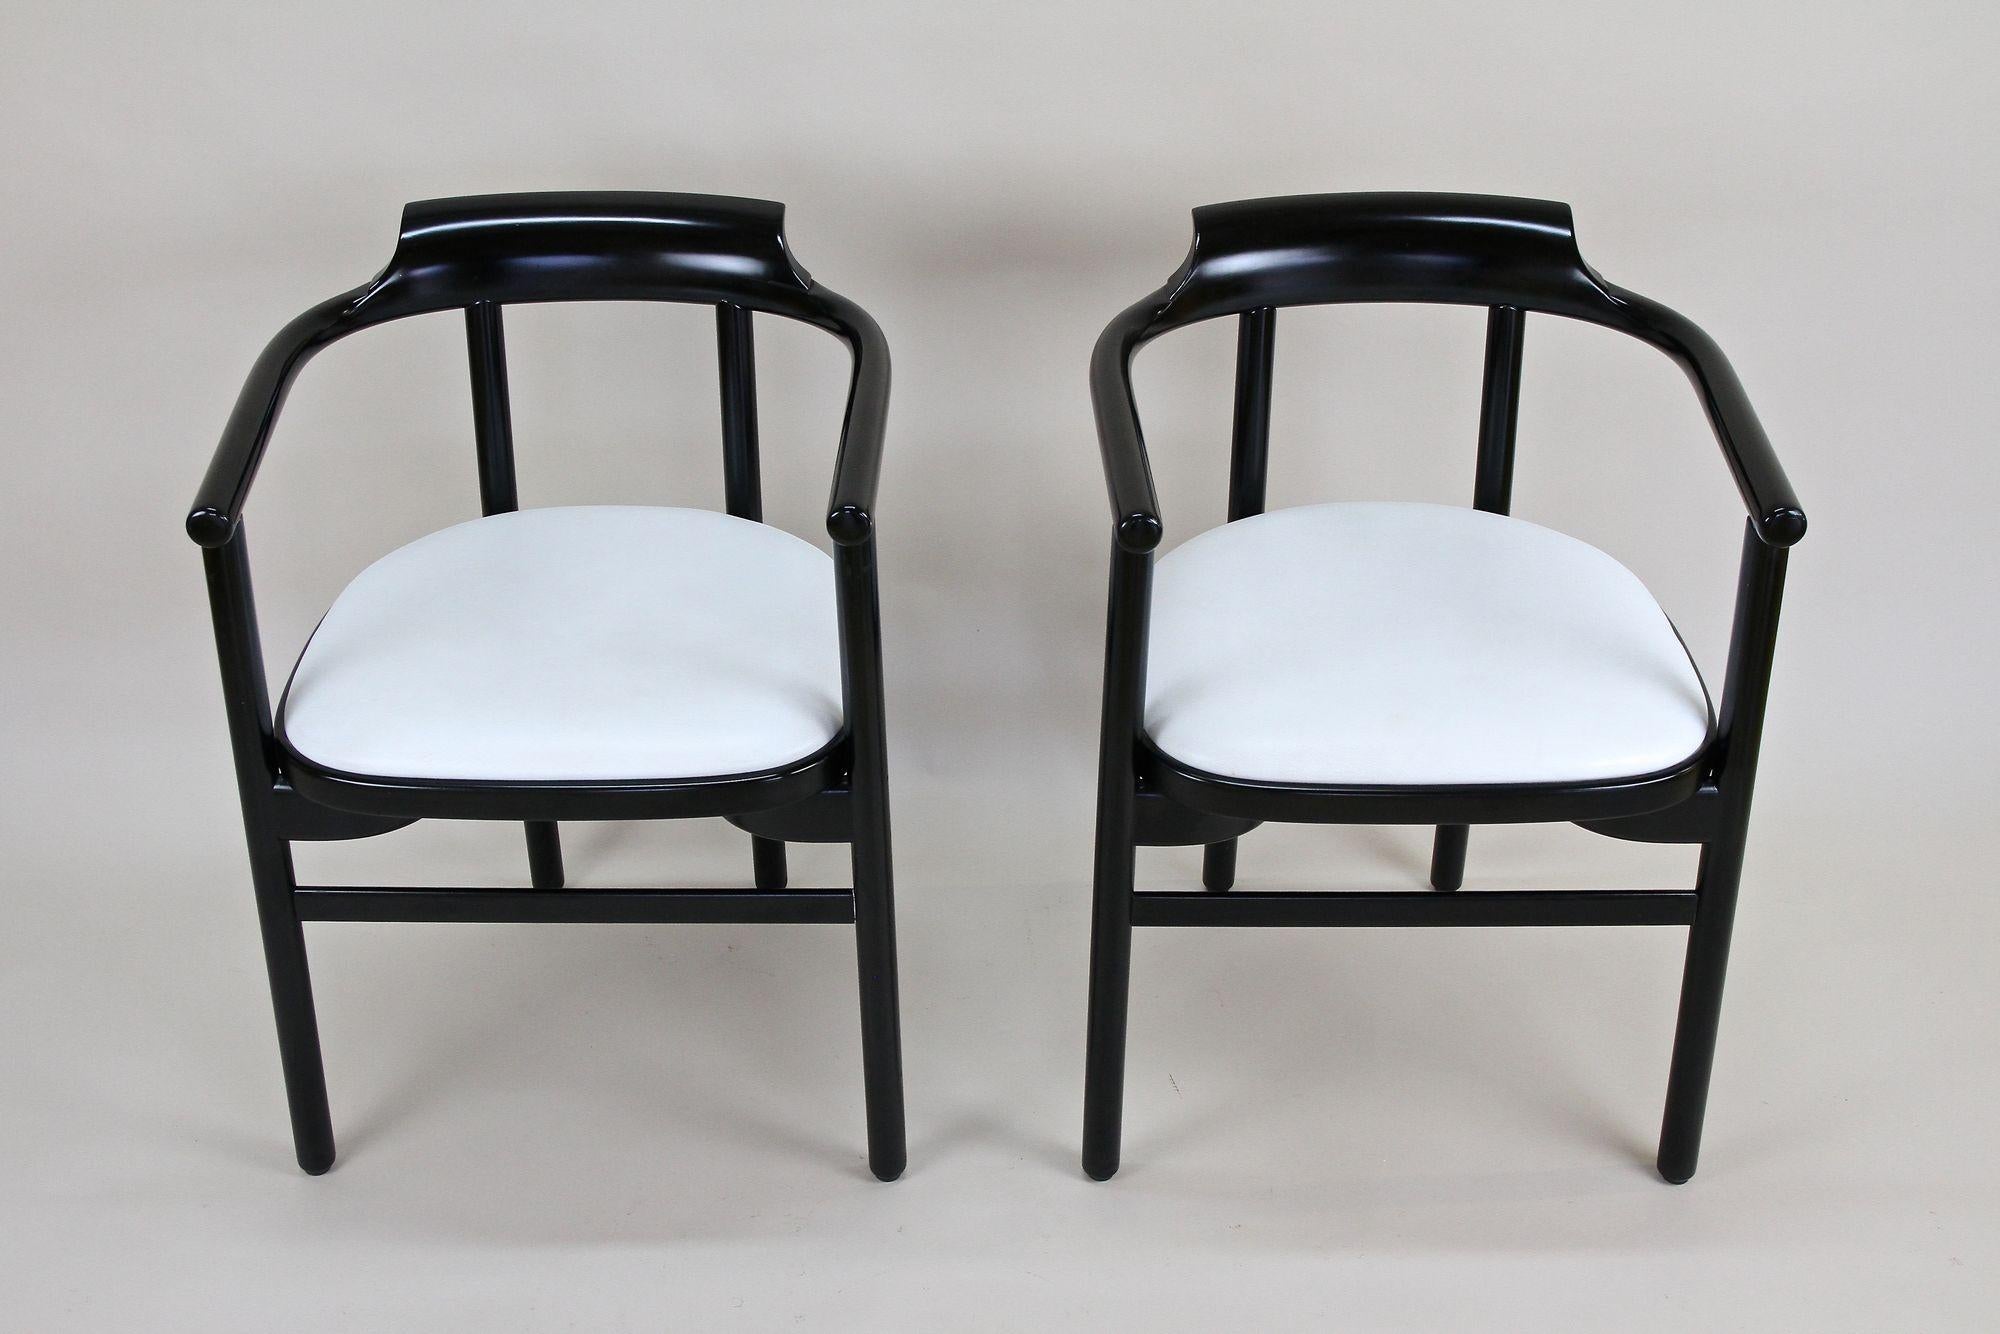 Austrian Pair of Black Armchairs with White Leather Upholstery by Thonet, at circa 1980 For Sale